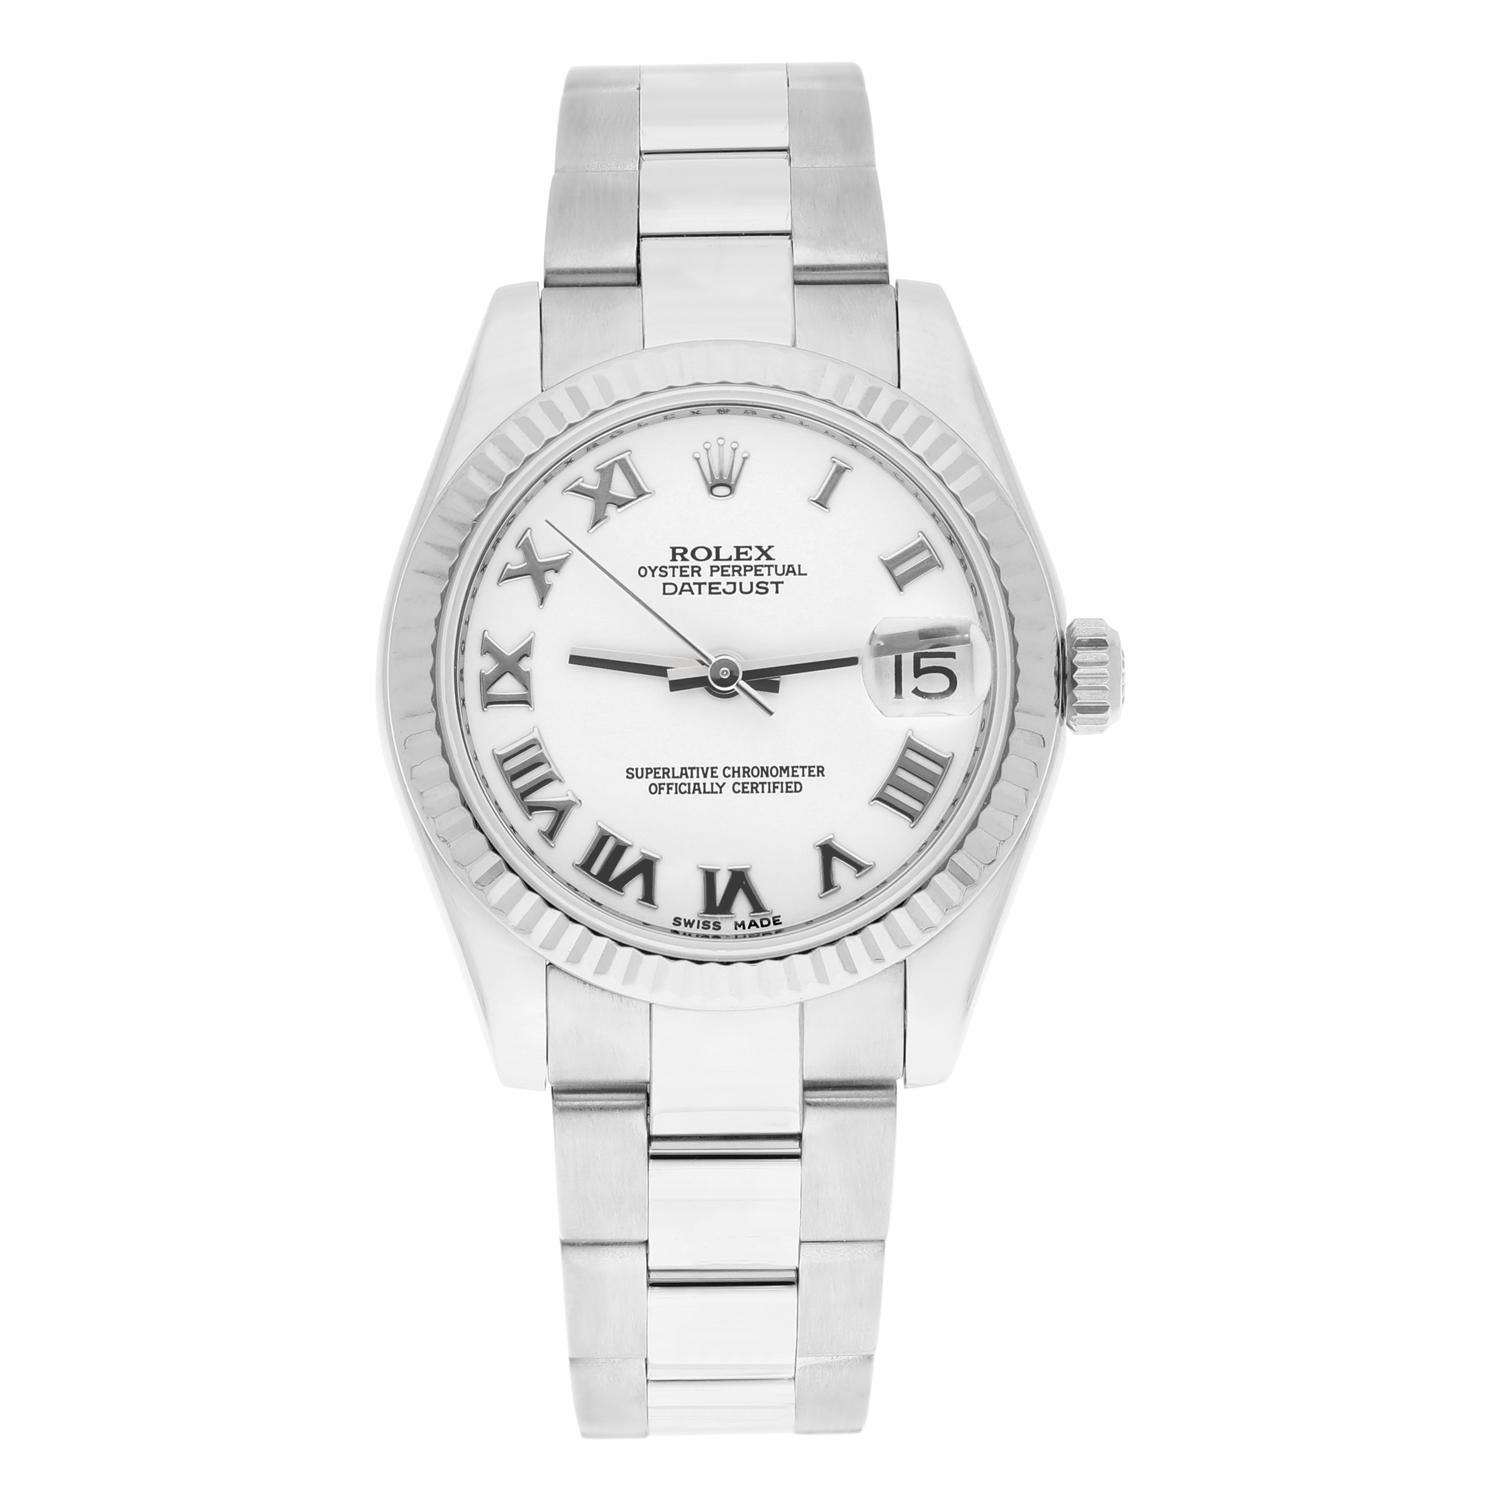 The sale includes a Rolex box and an appraisal certificate which states the watch's credentials. Attached to the appraisal certificate is our 1 year mechanical warranty.

Silver-tone stainless steel case with a silver-tone stainless steel oyster